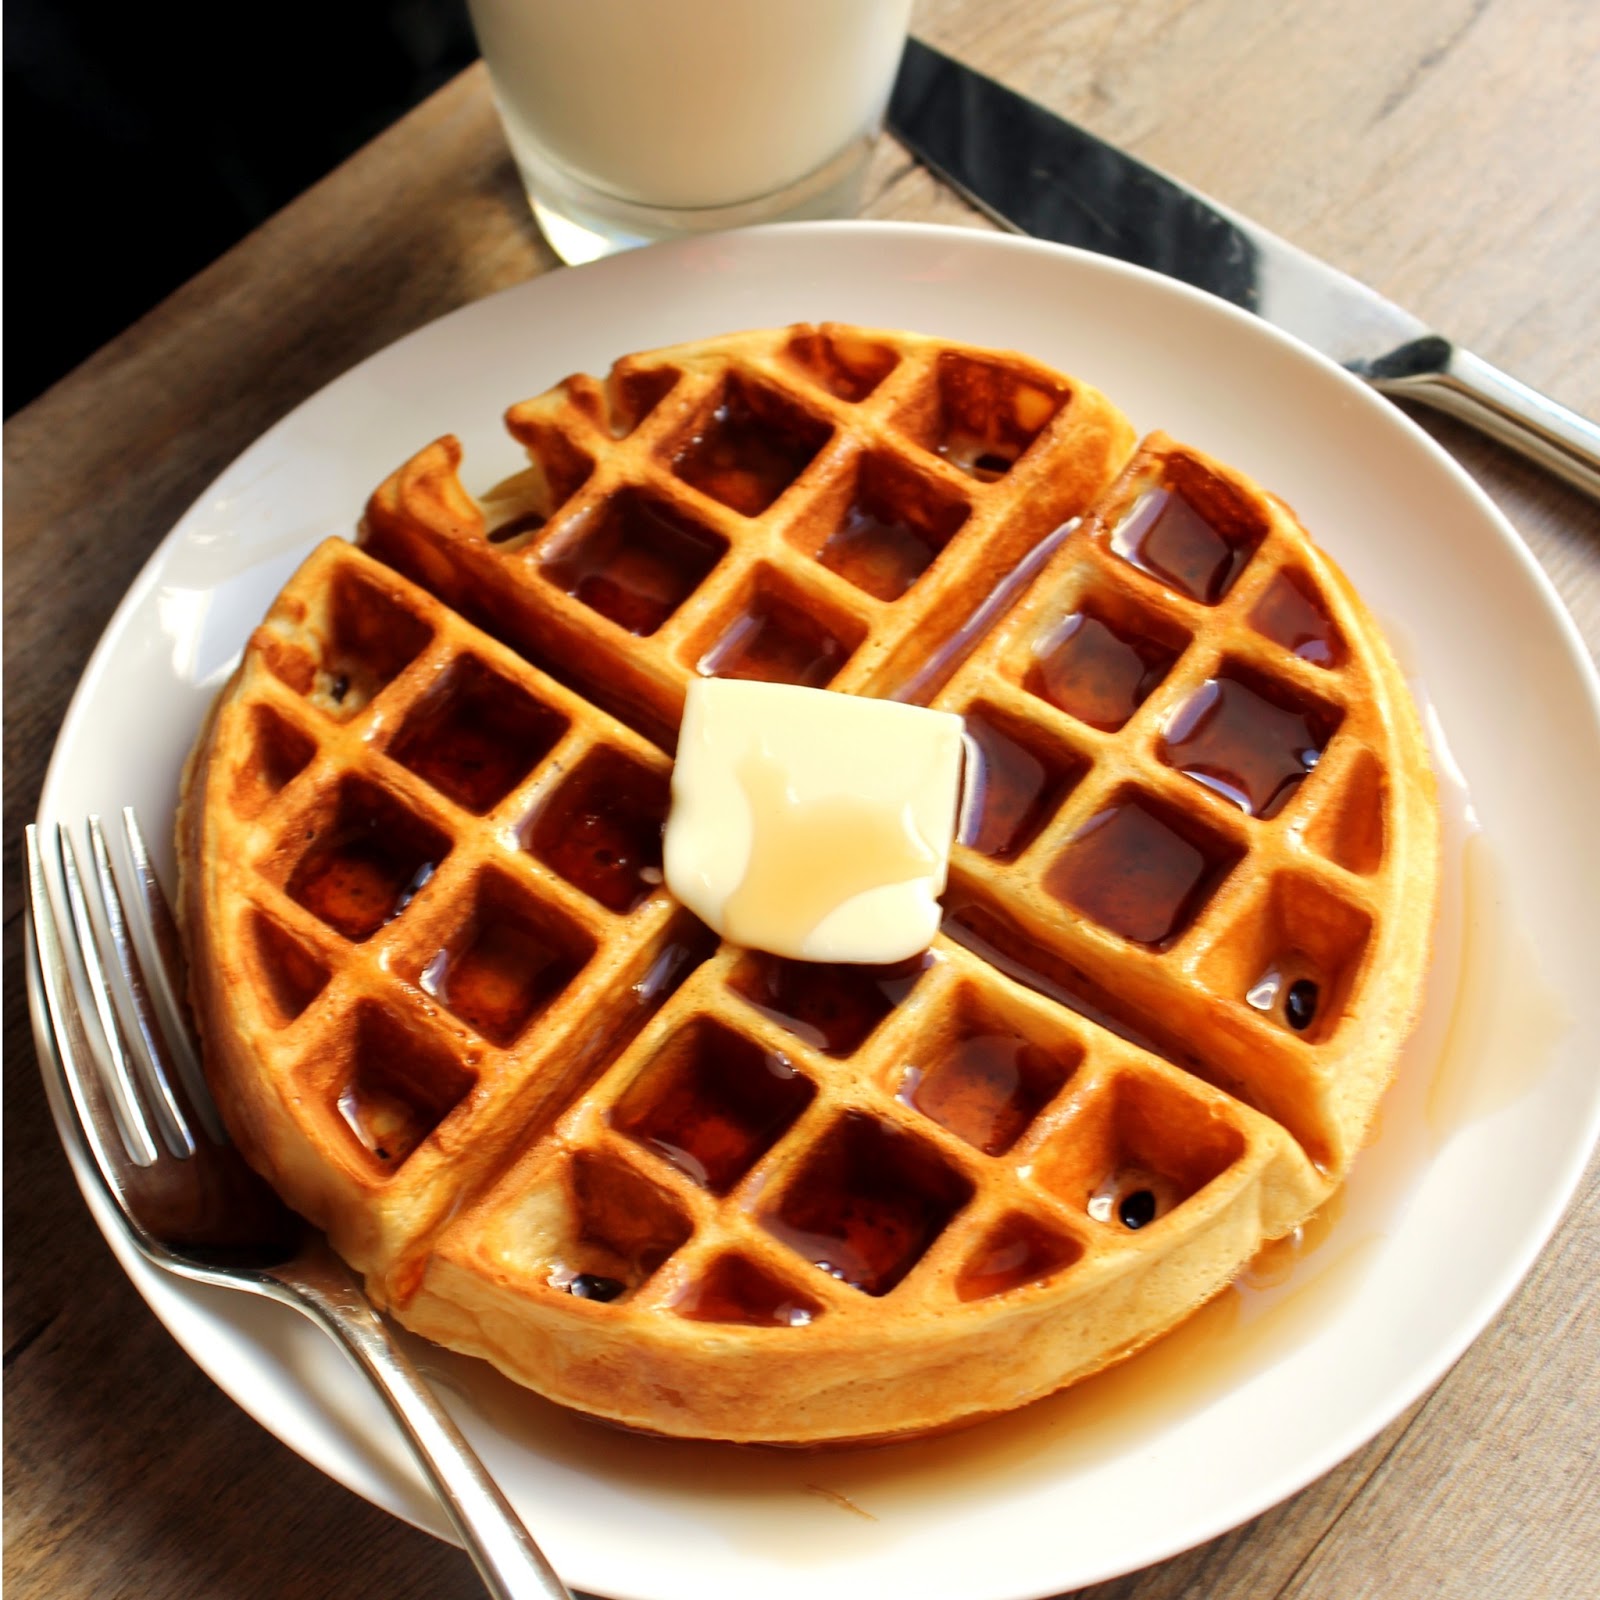 Waffle Wallpaper Food Hq Pictures 4k